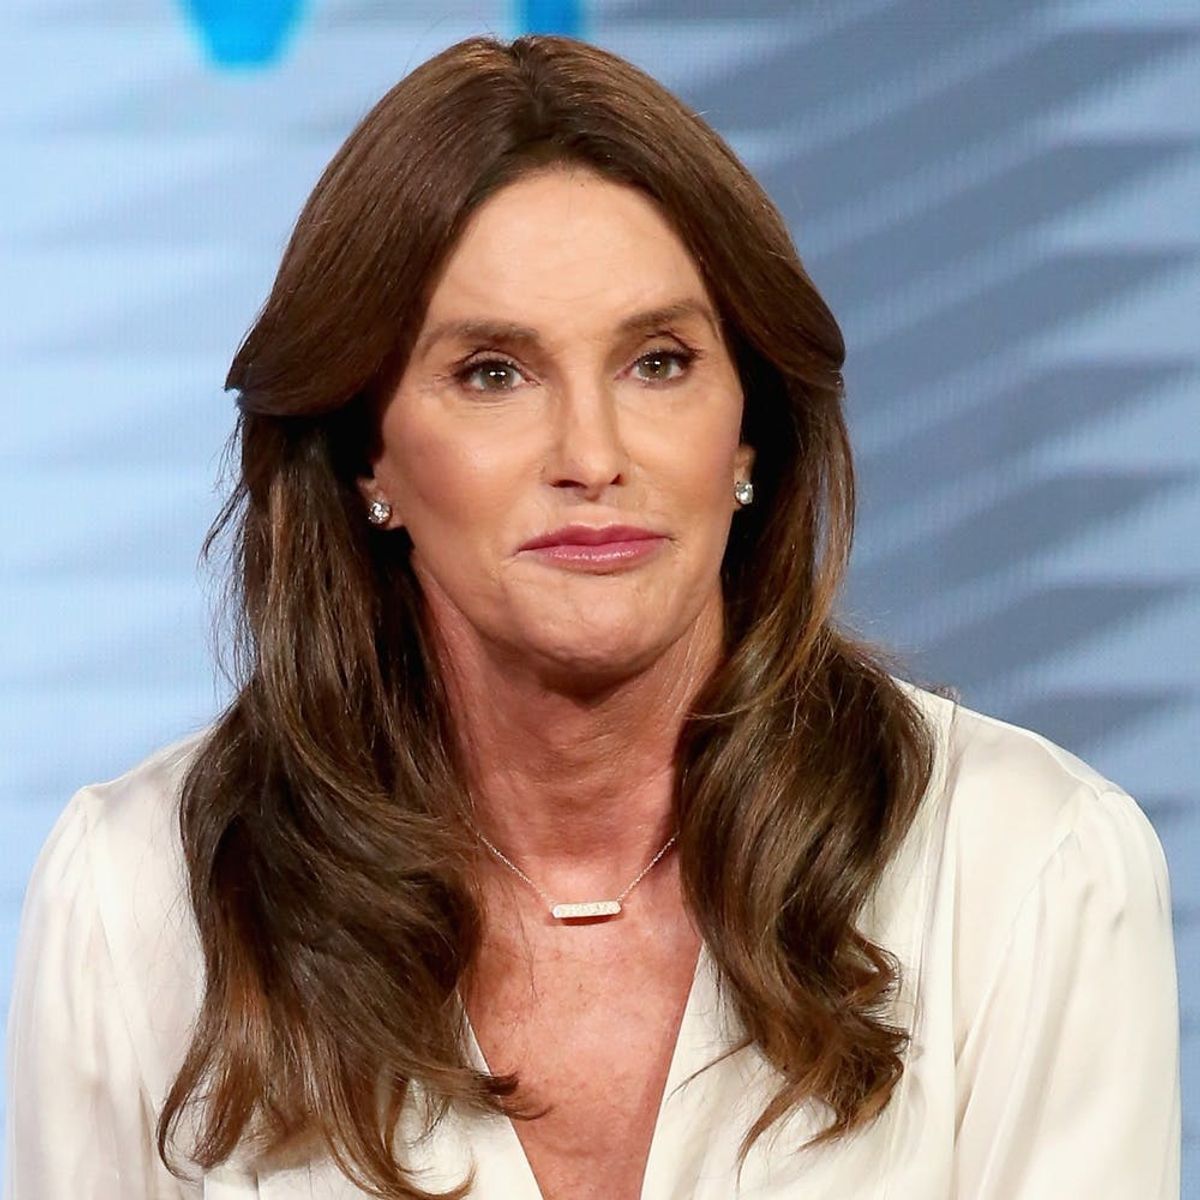 Caitlyn Jenner Opens Up About Life After Her “Final Surgery”